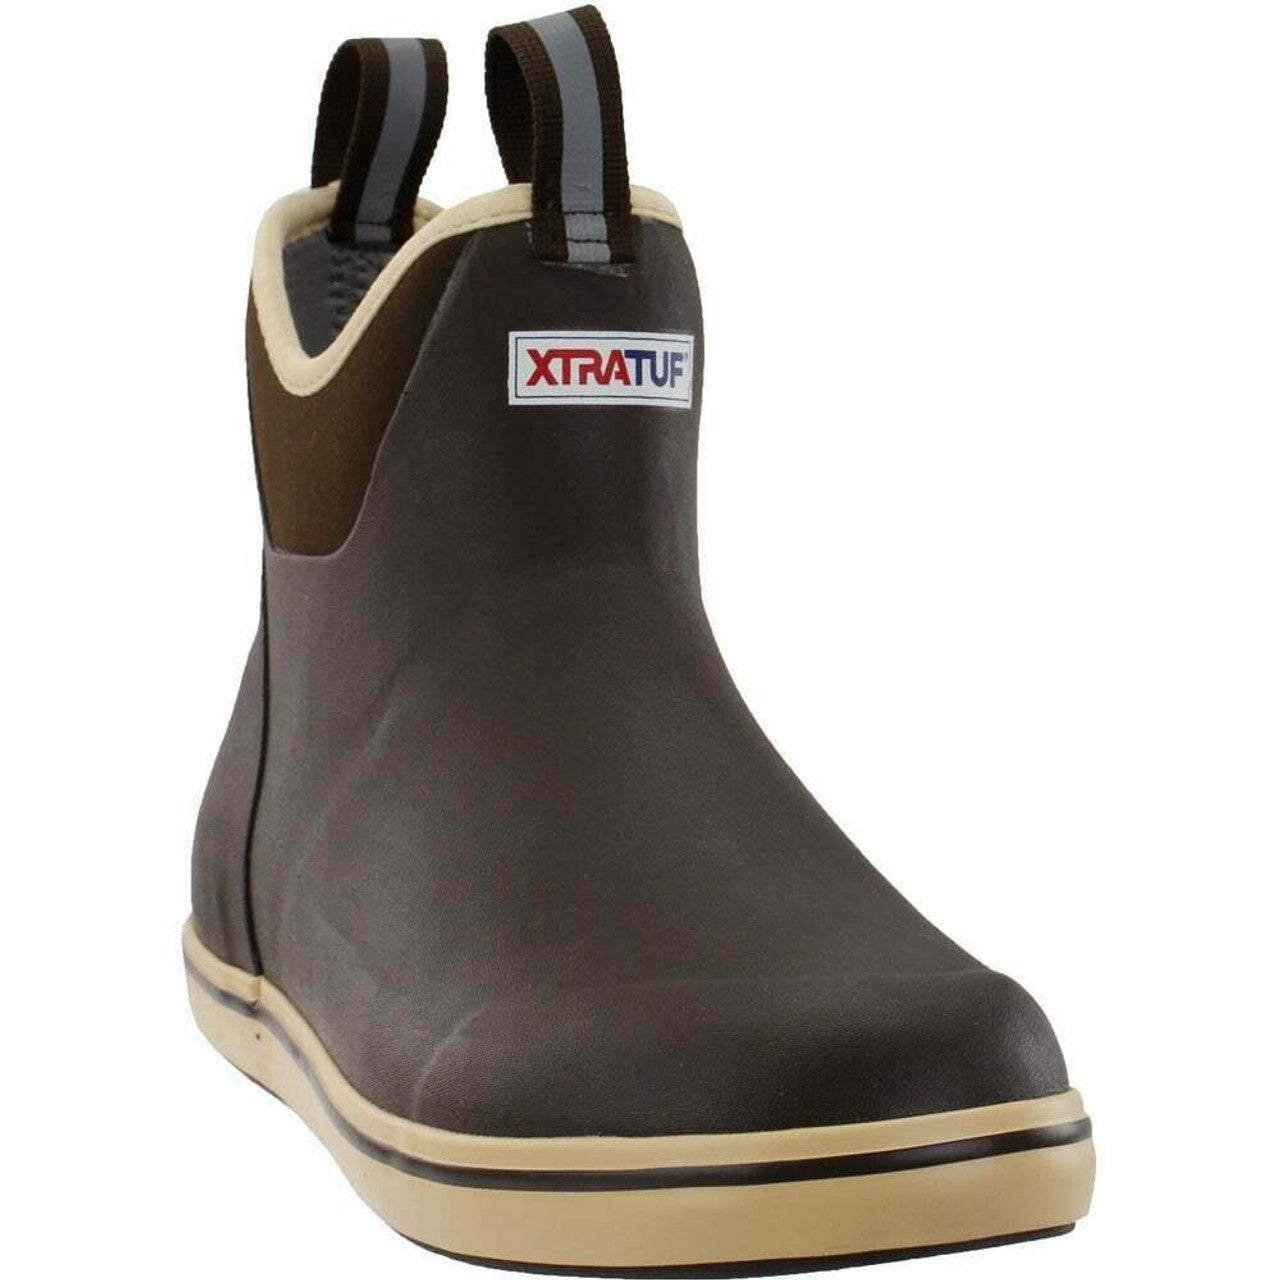 Xtratuf Ankle Full Rubber Deck Boot - Size 13 - Chocolate/Tan, 6